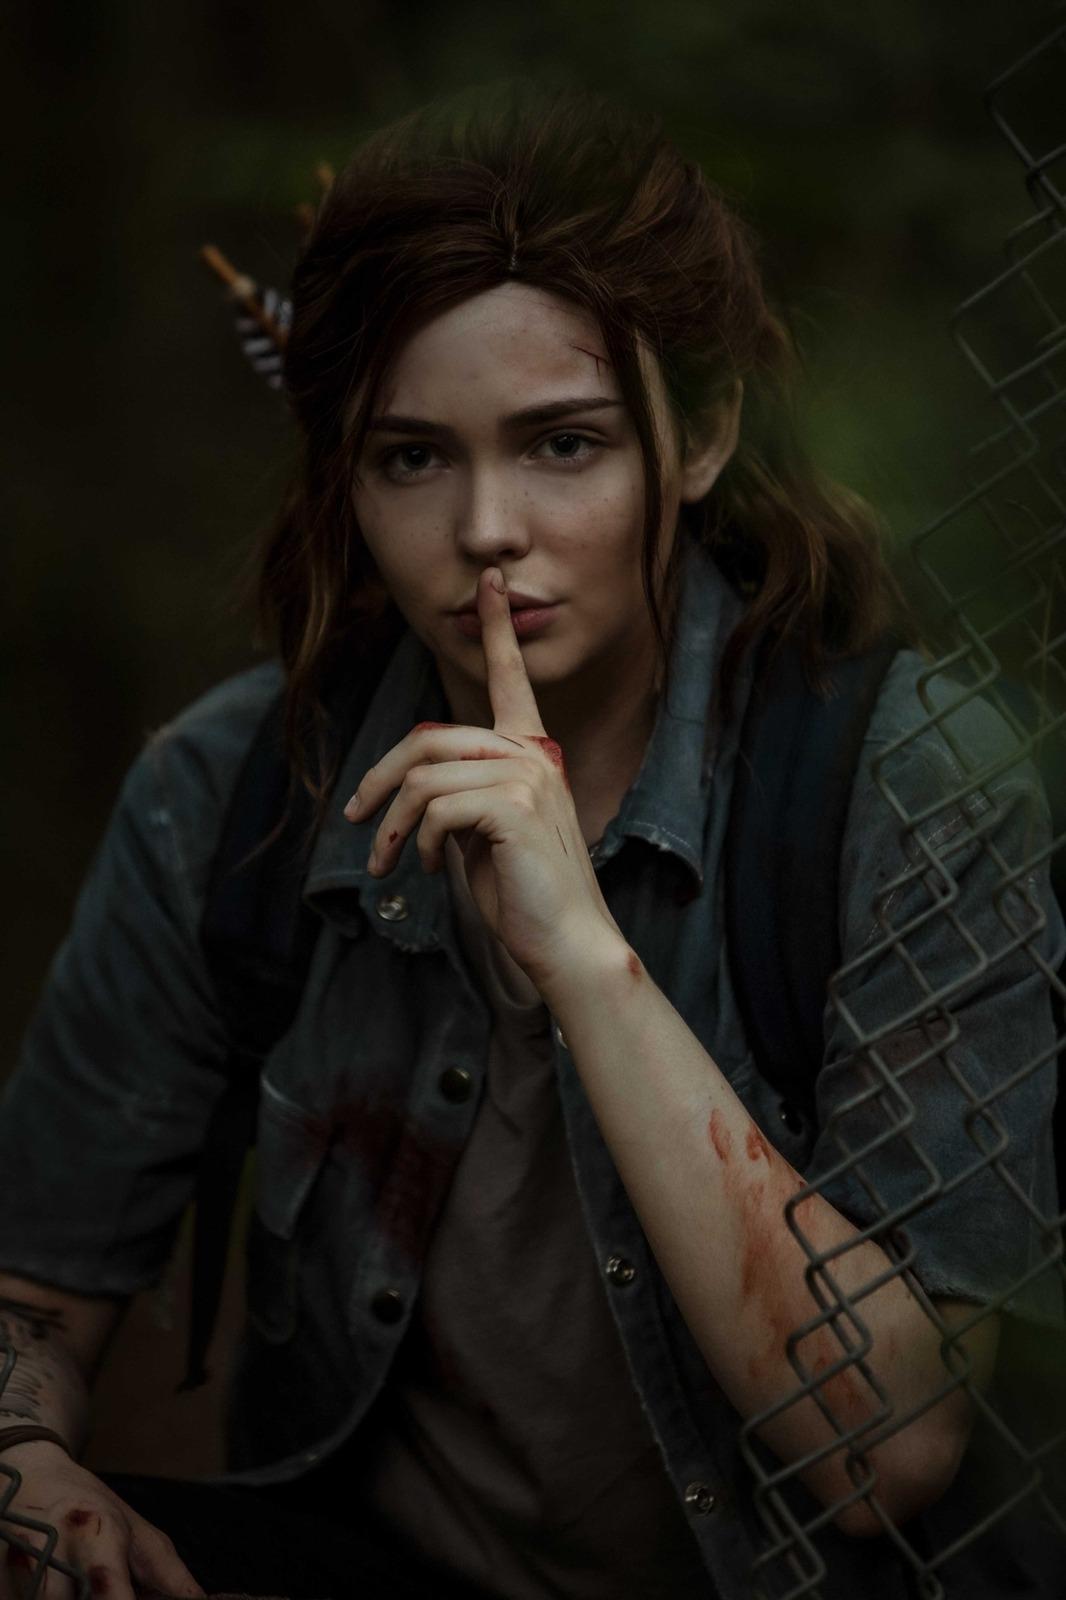 Naughty Dog, LLC - Ellie and Joel cosplay from The Last of Us by  nightmares_of_light and gianlucad94. Share your own cosplay and other  creations here